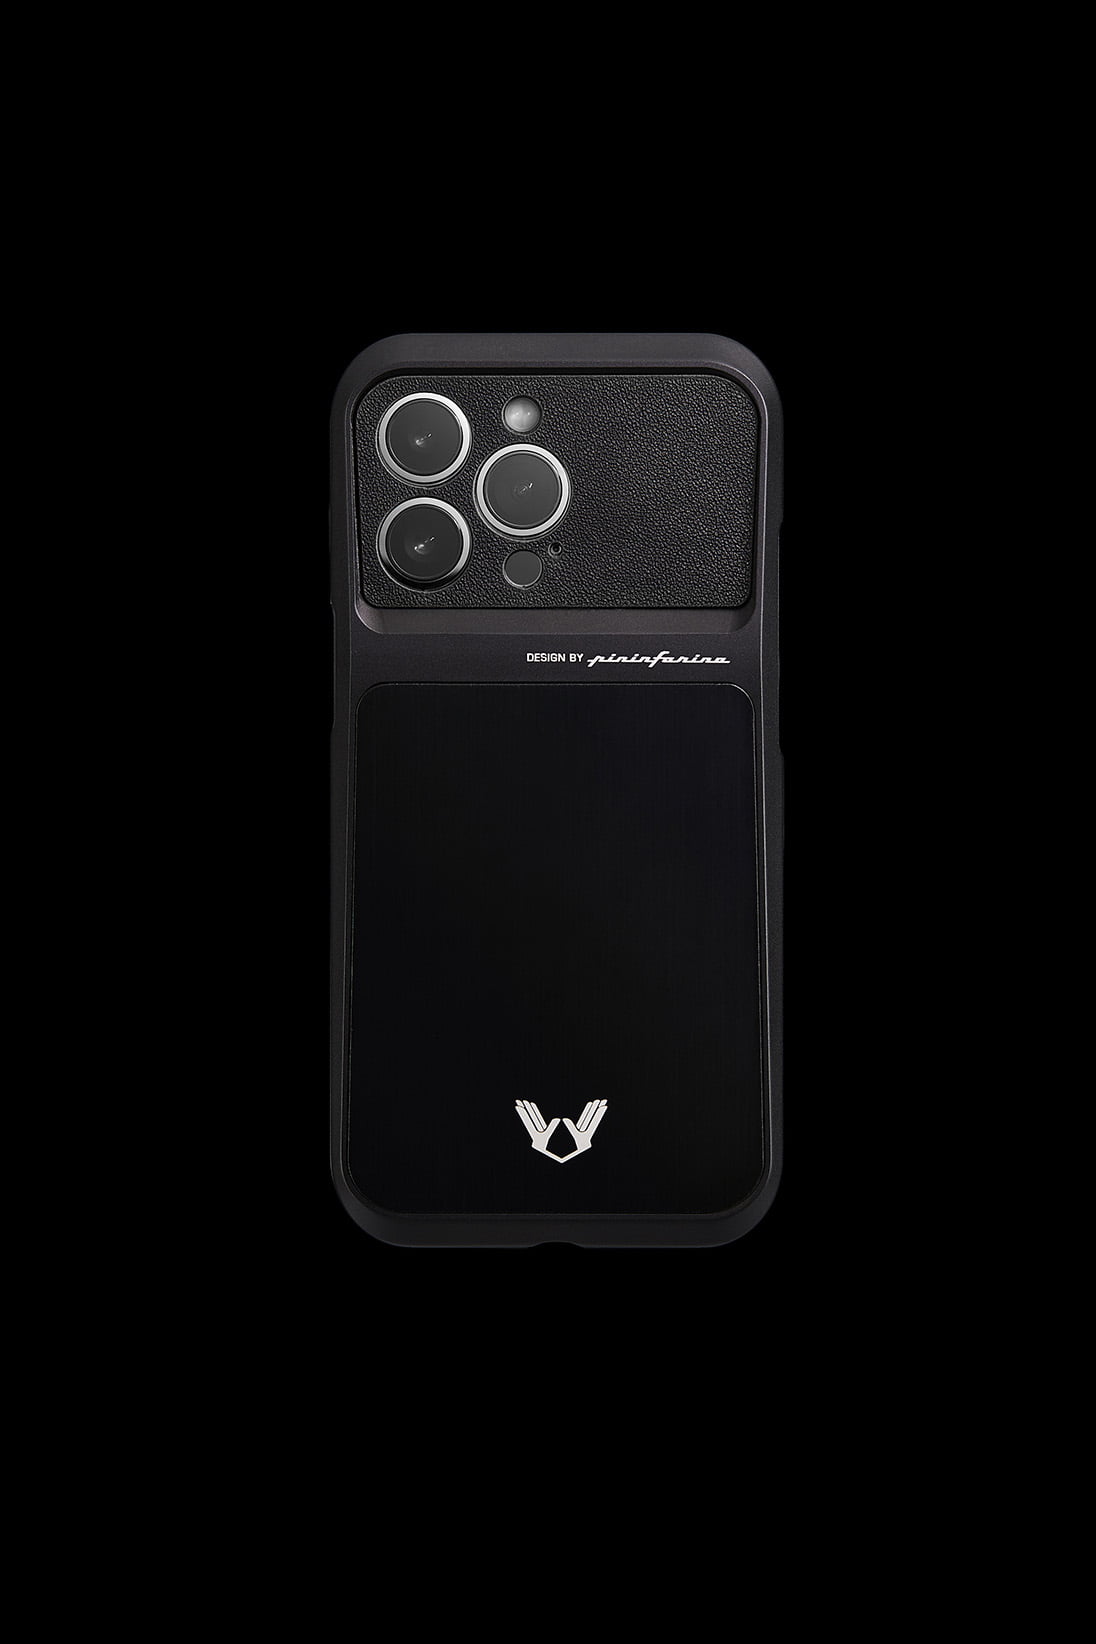 Pininfarina x INKAR Exclusive Limited Edition iPhone cover